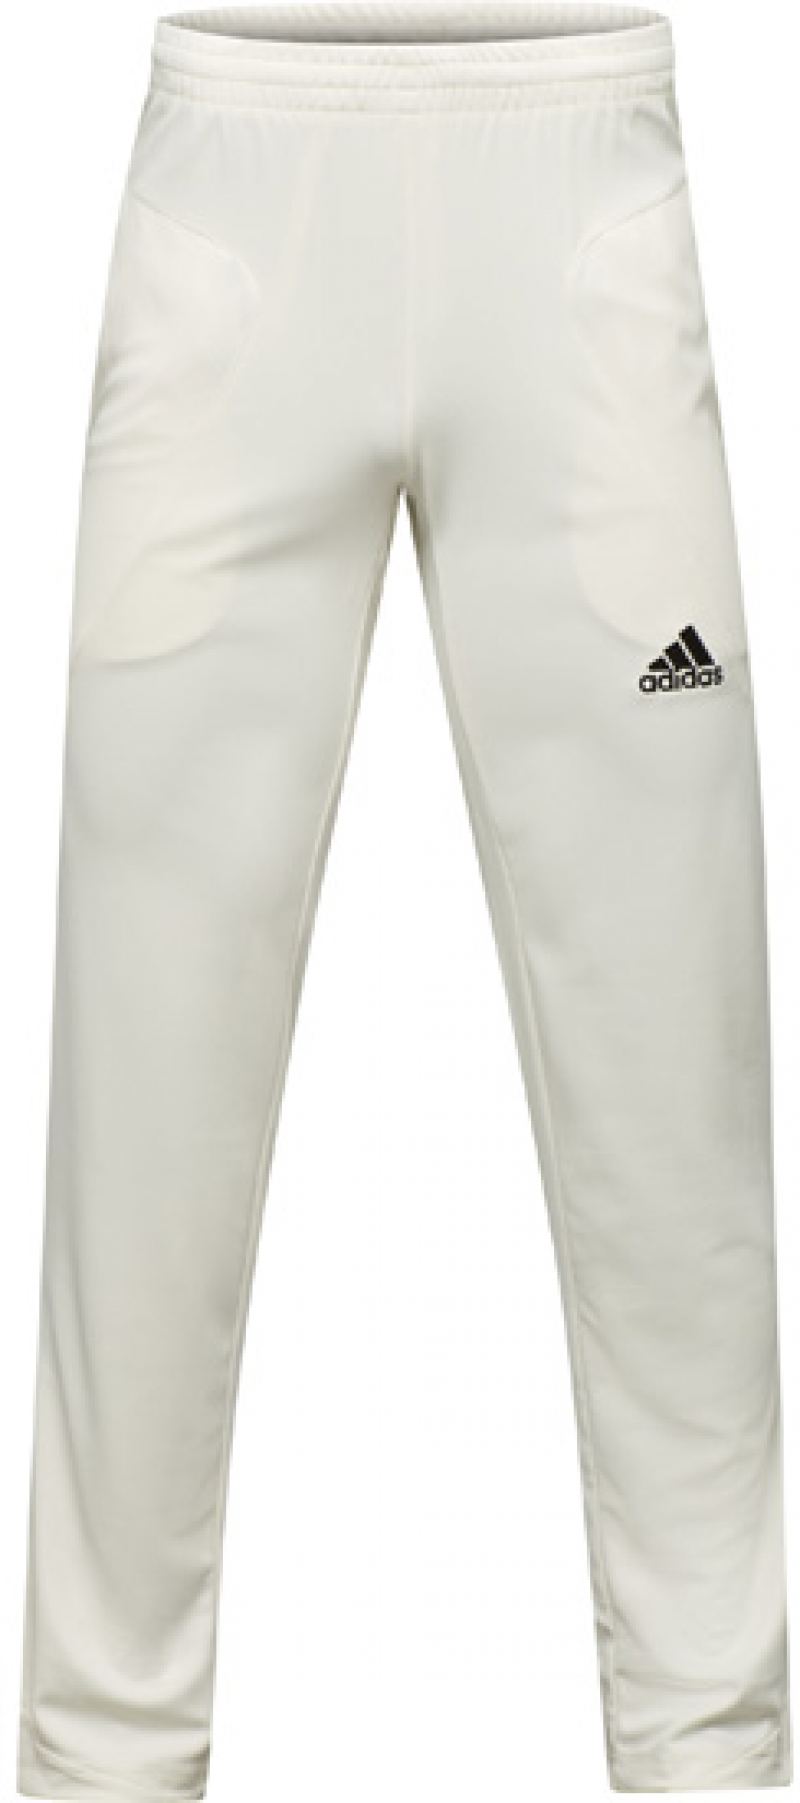 Adidas Howzat Cricket Trousers (Adult 